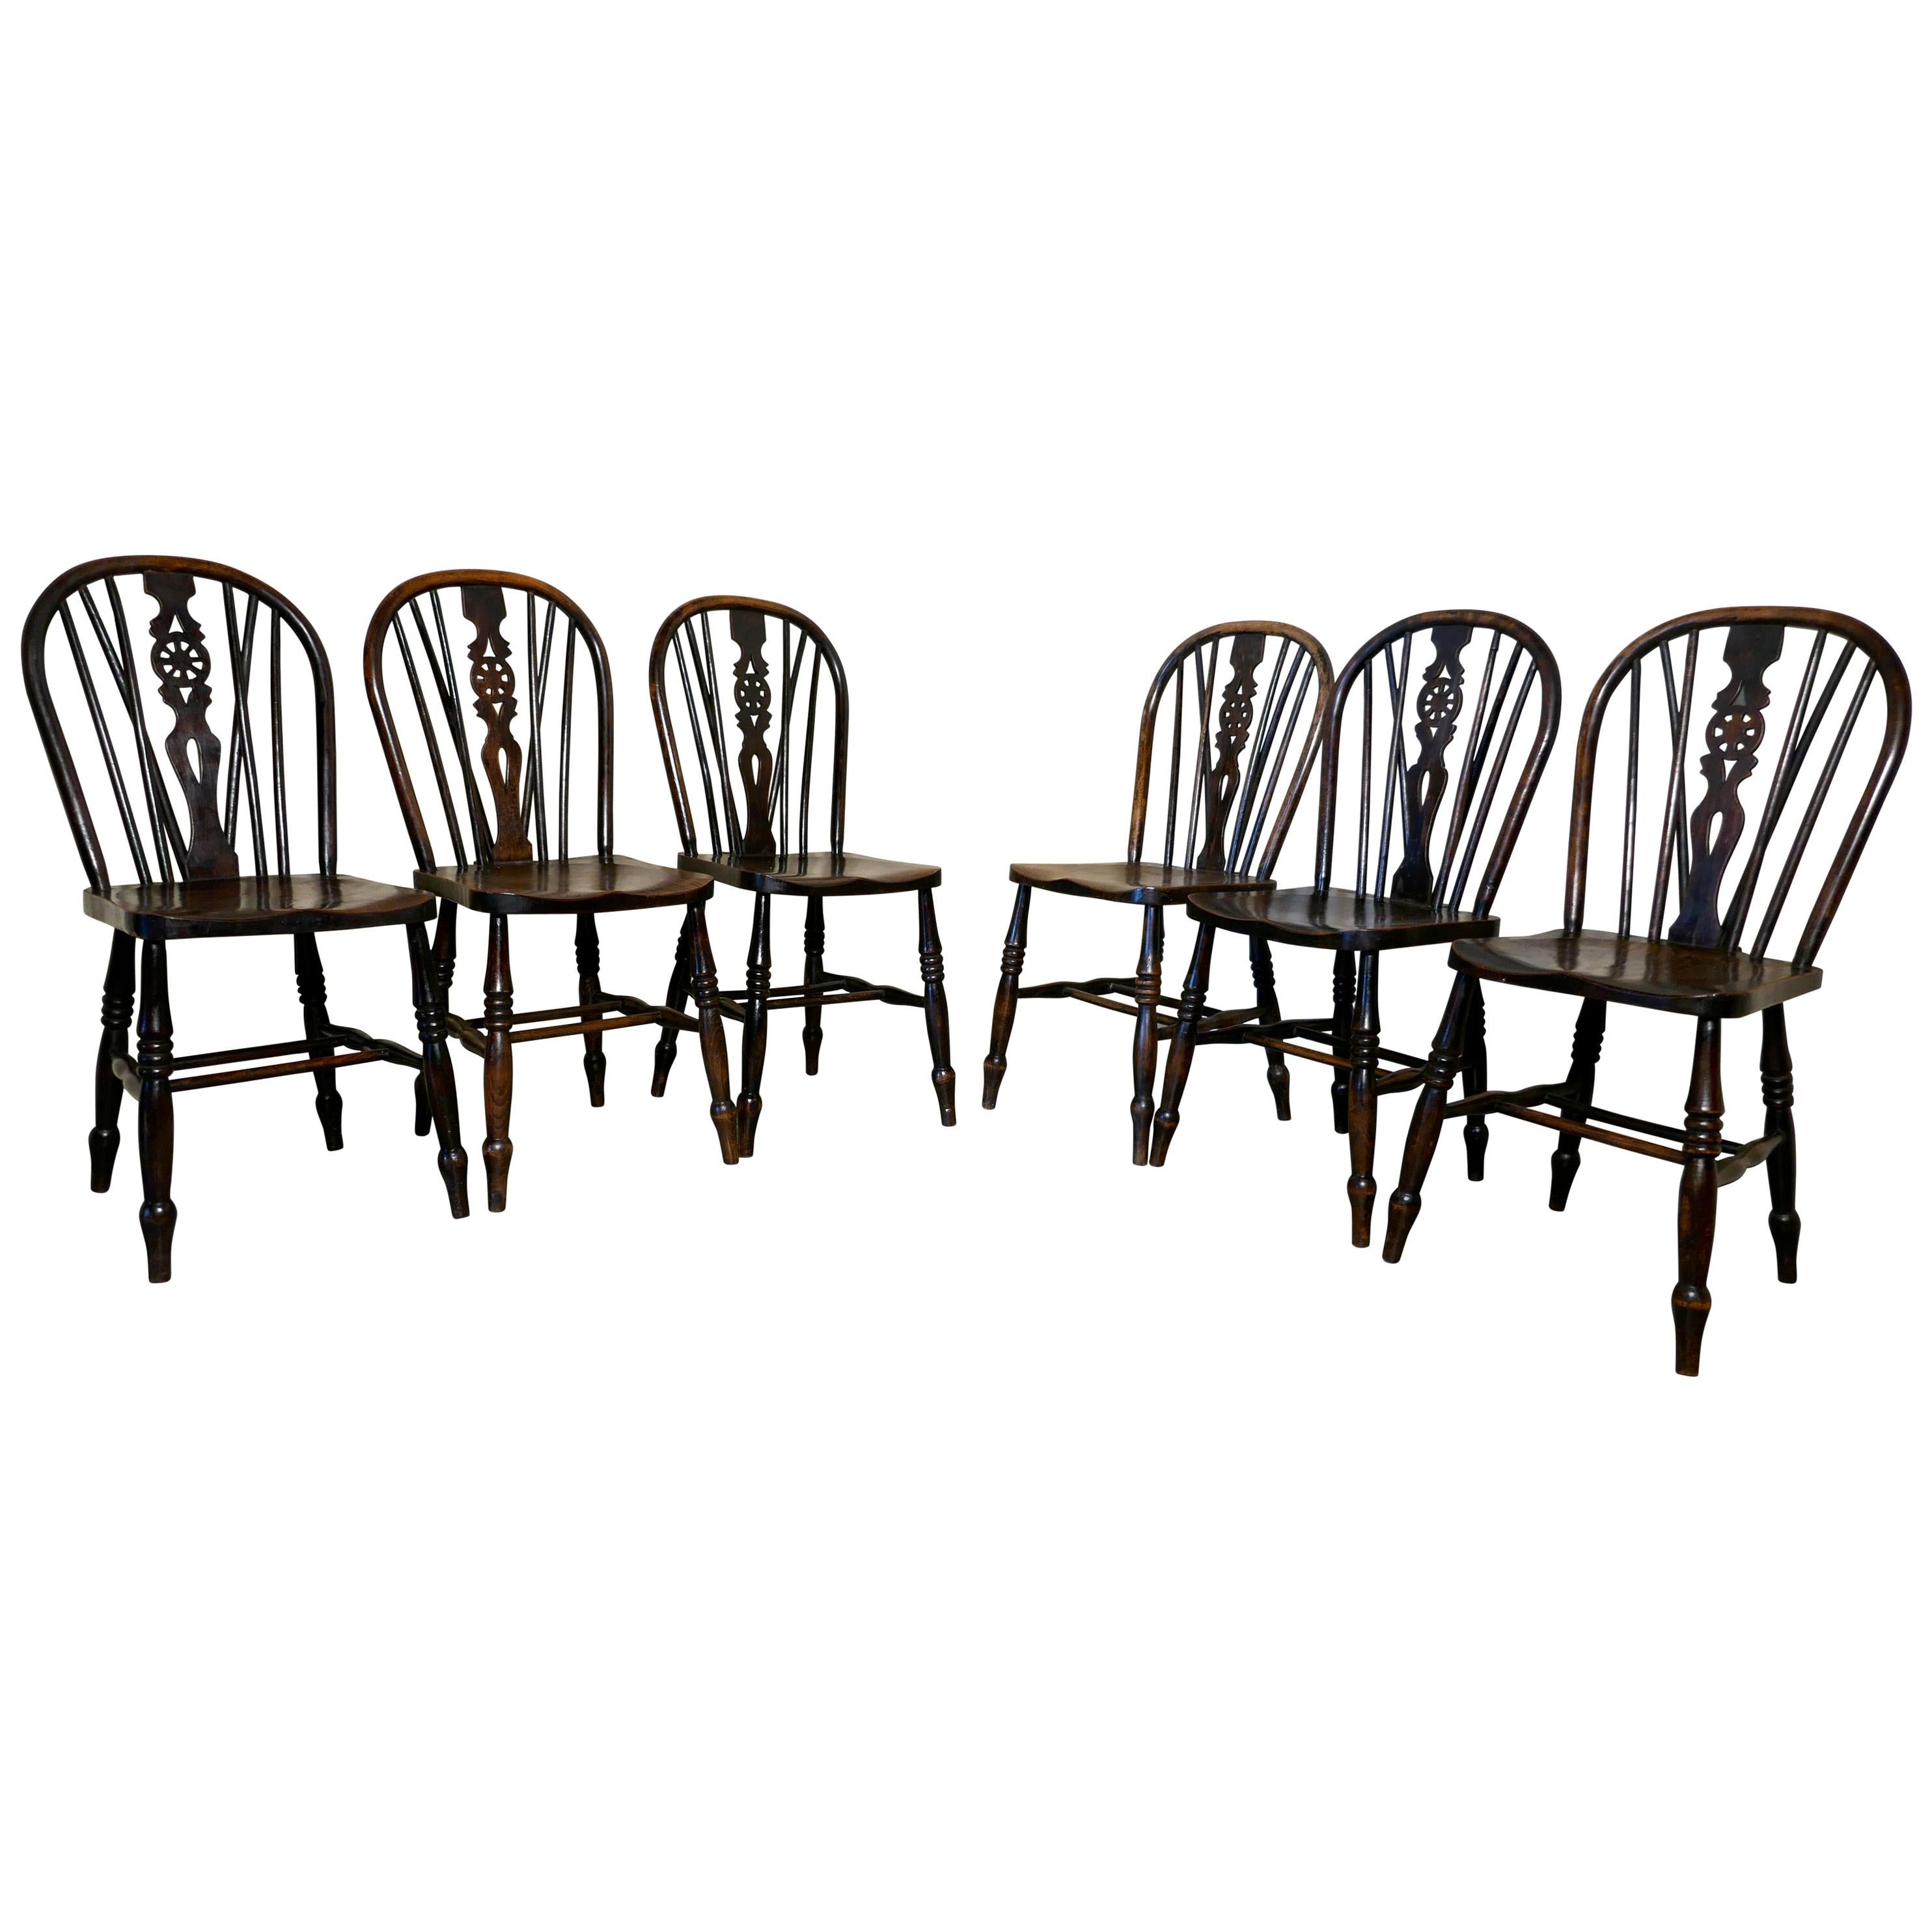 Set of Six Early Victorian Beech and Elm Wheel Back Kitchen Chairs